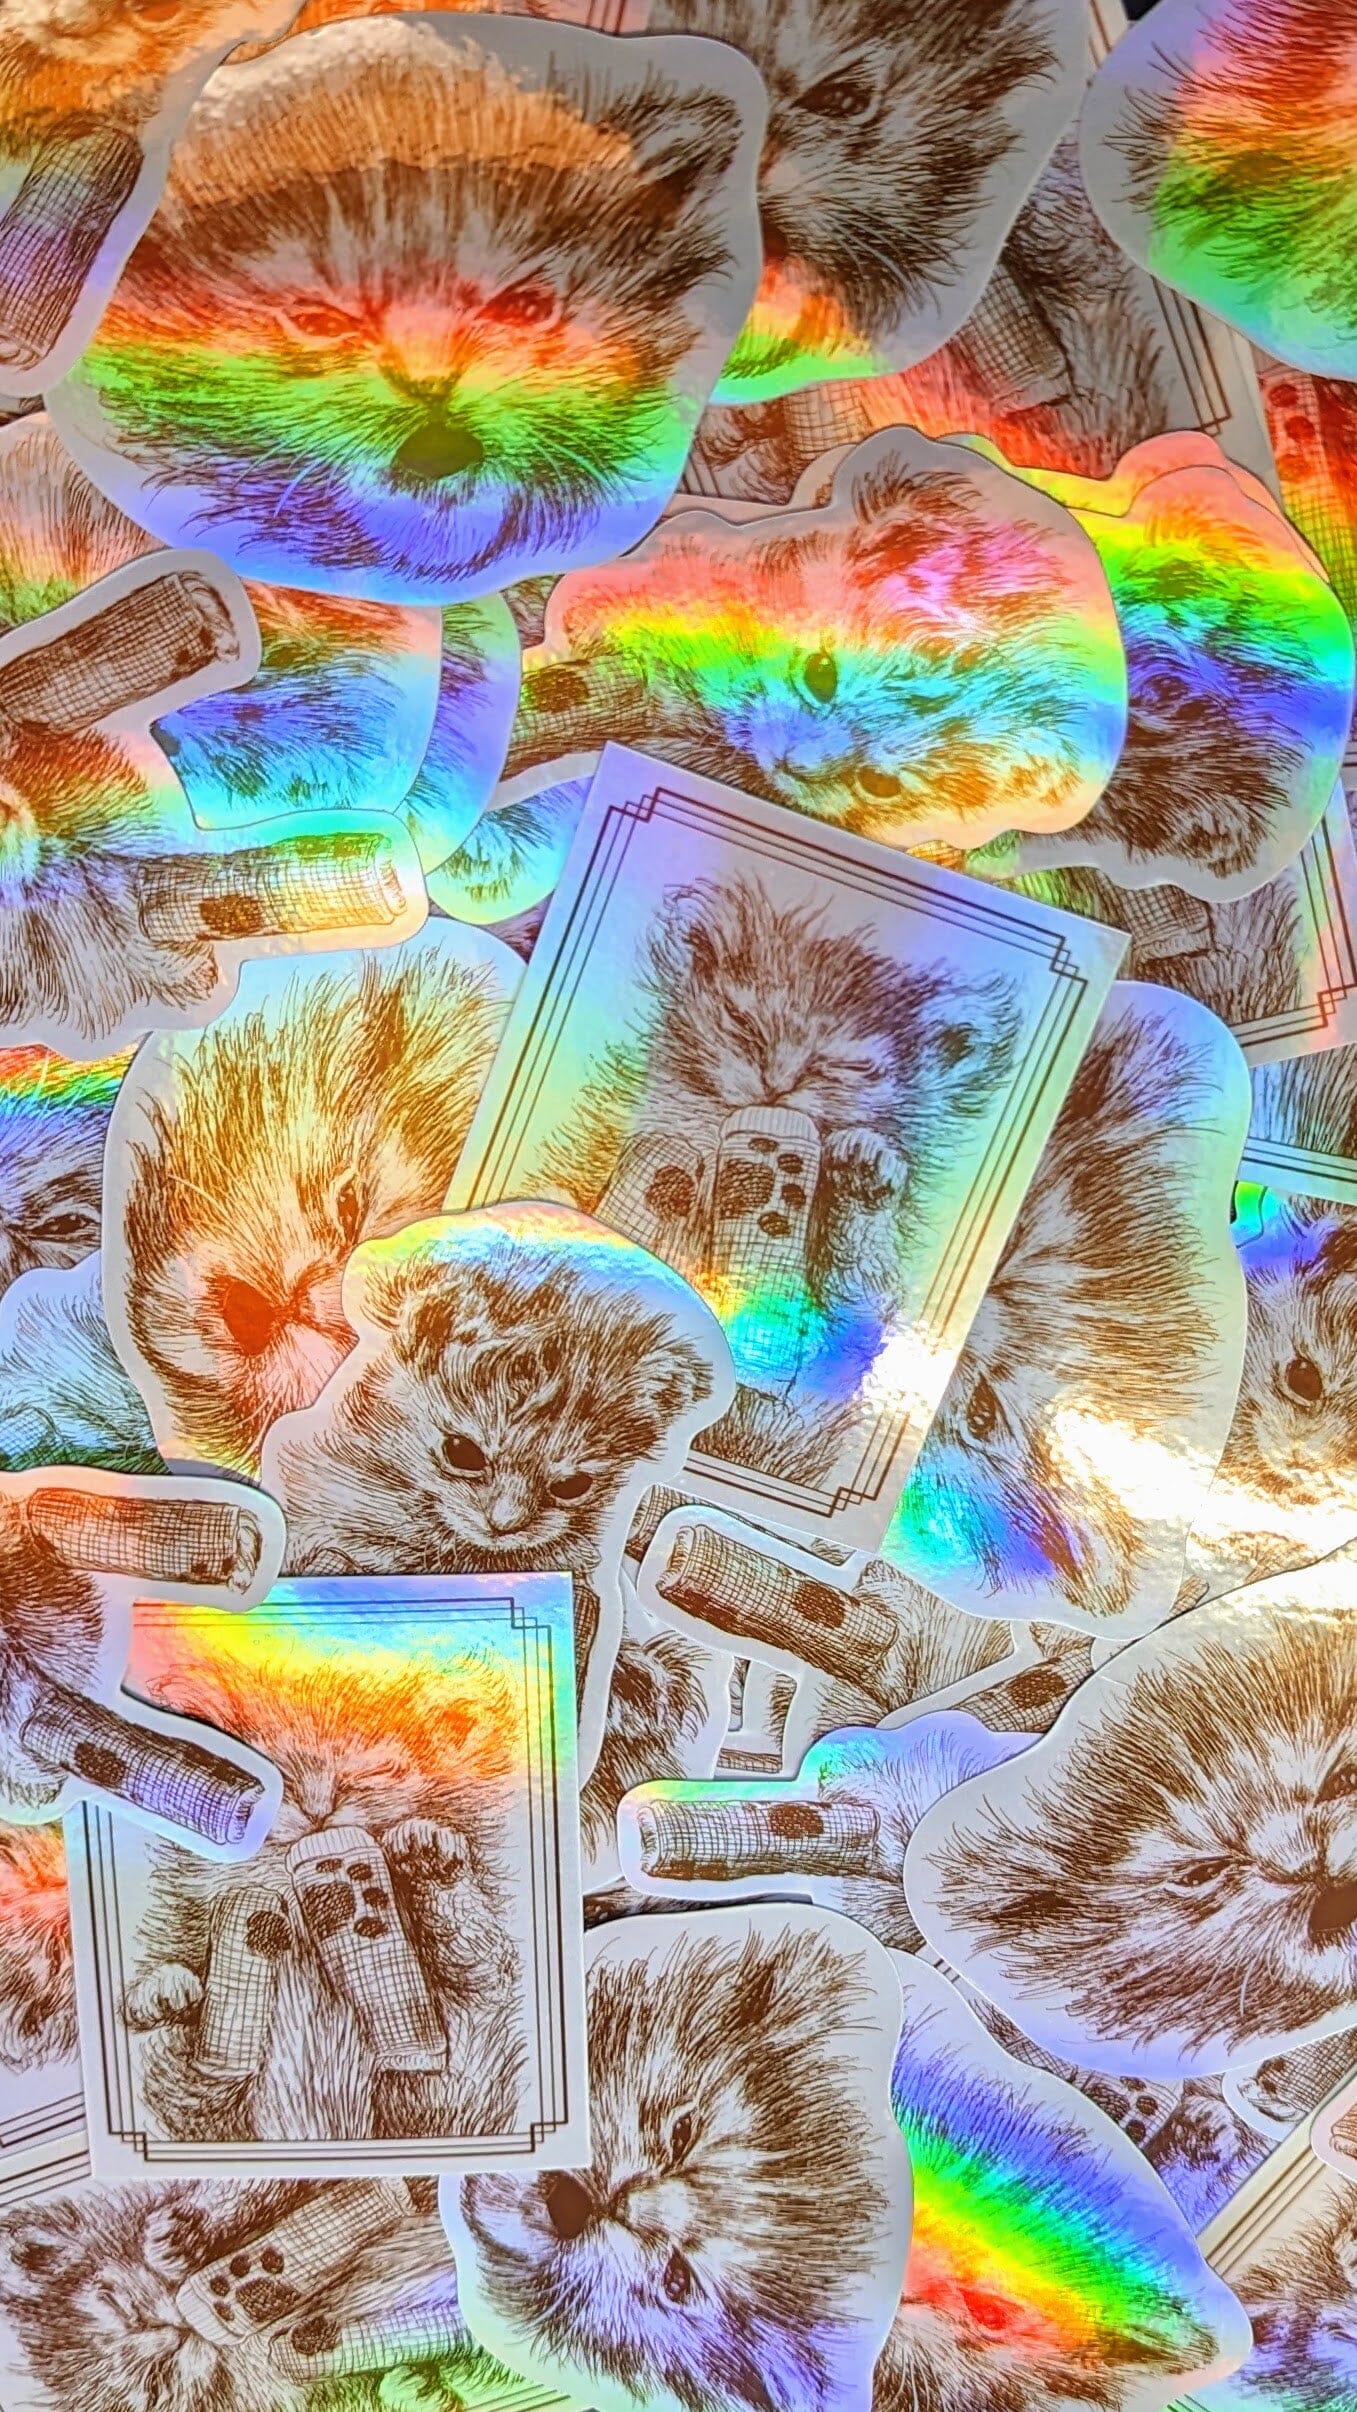 Angry Tater Tot Holographic Sticker ($1 donated to Kitty CrusAIDe per sticker sold) Decorative Stickers JoyousJoyfulJoyness 